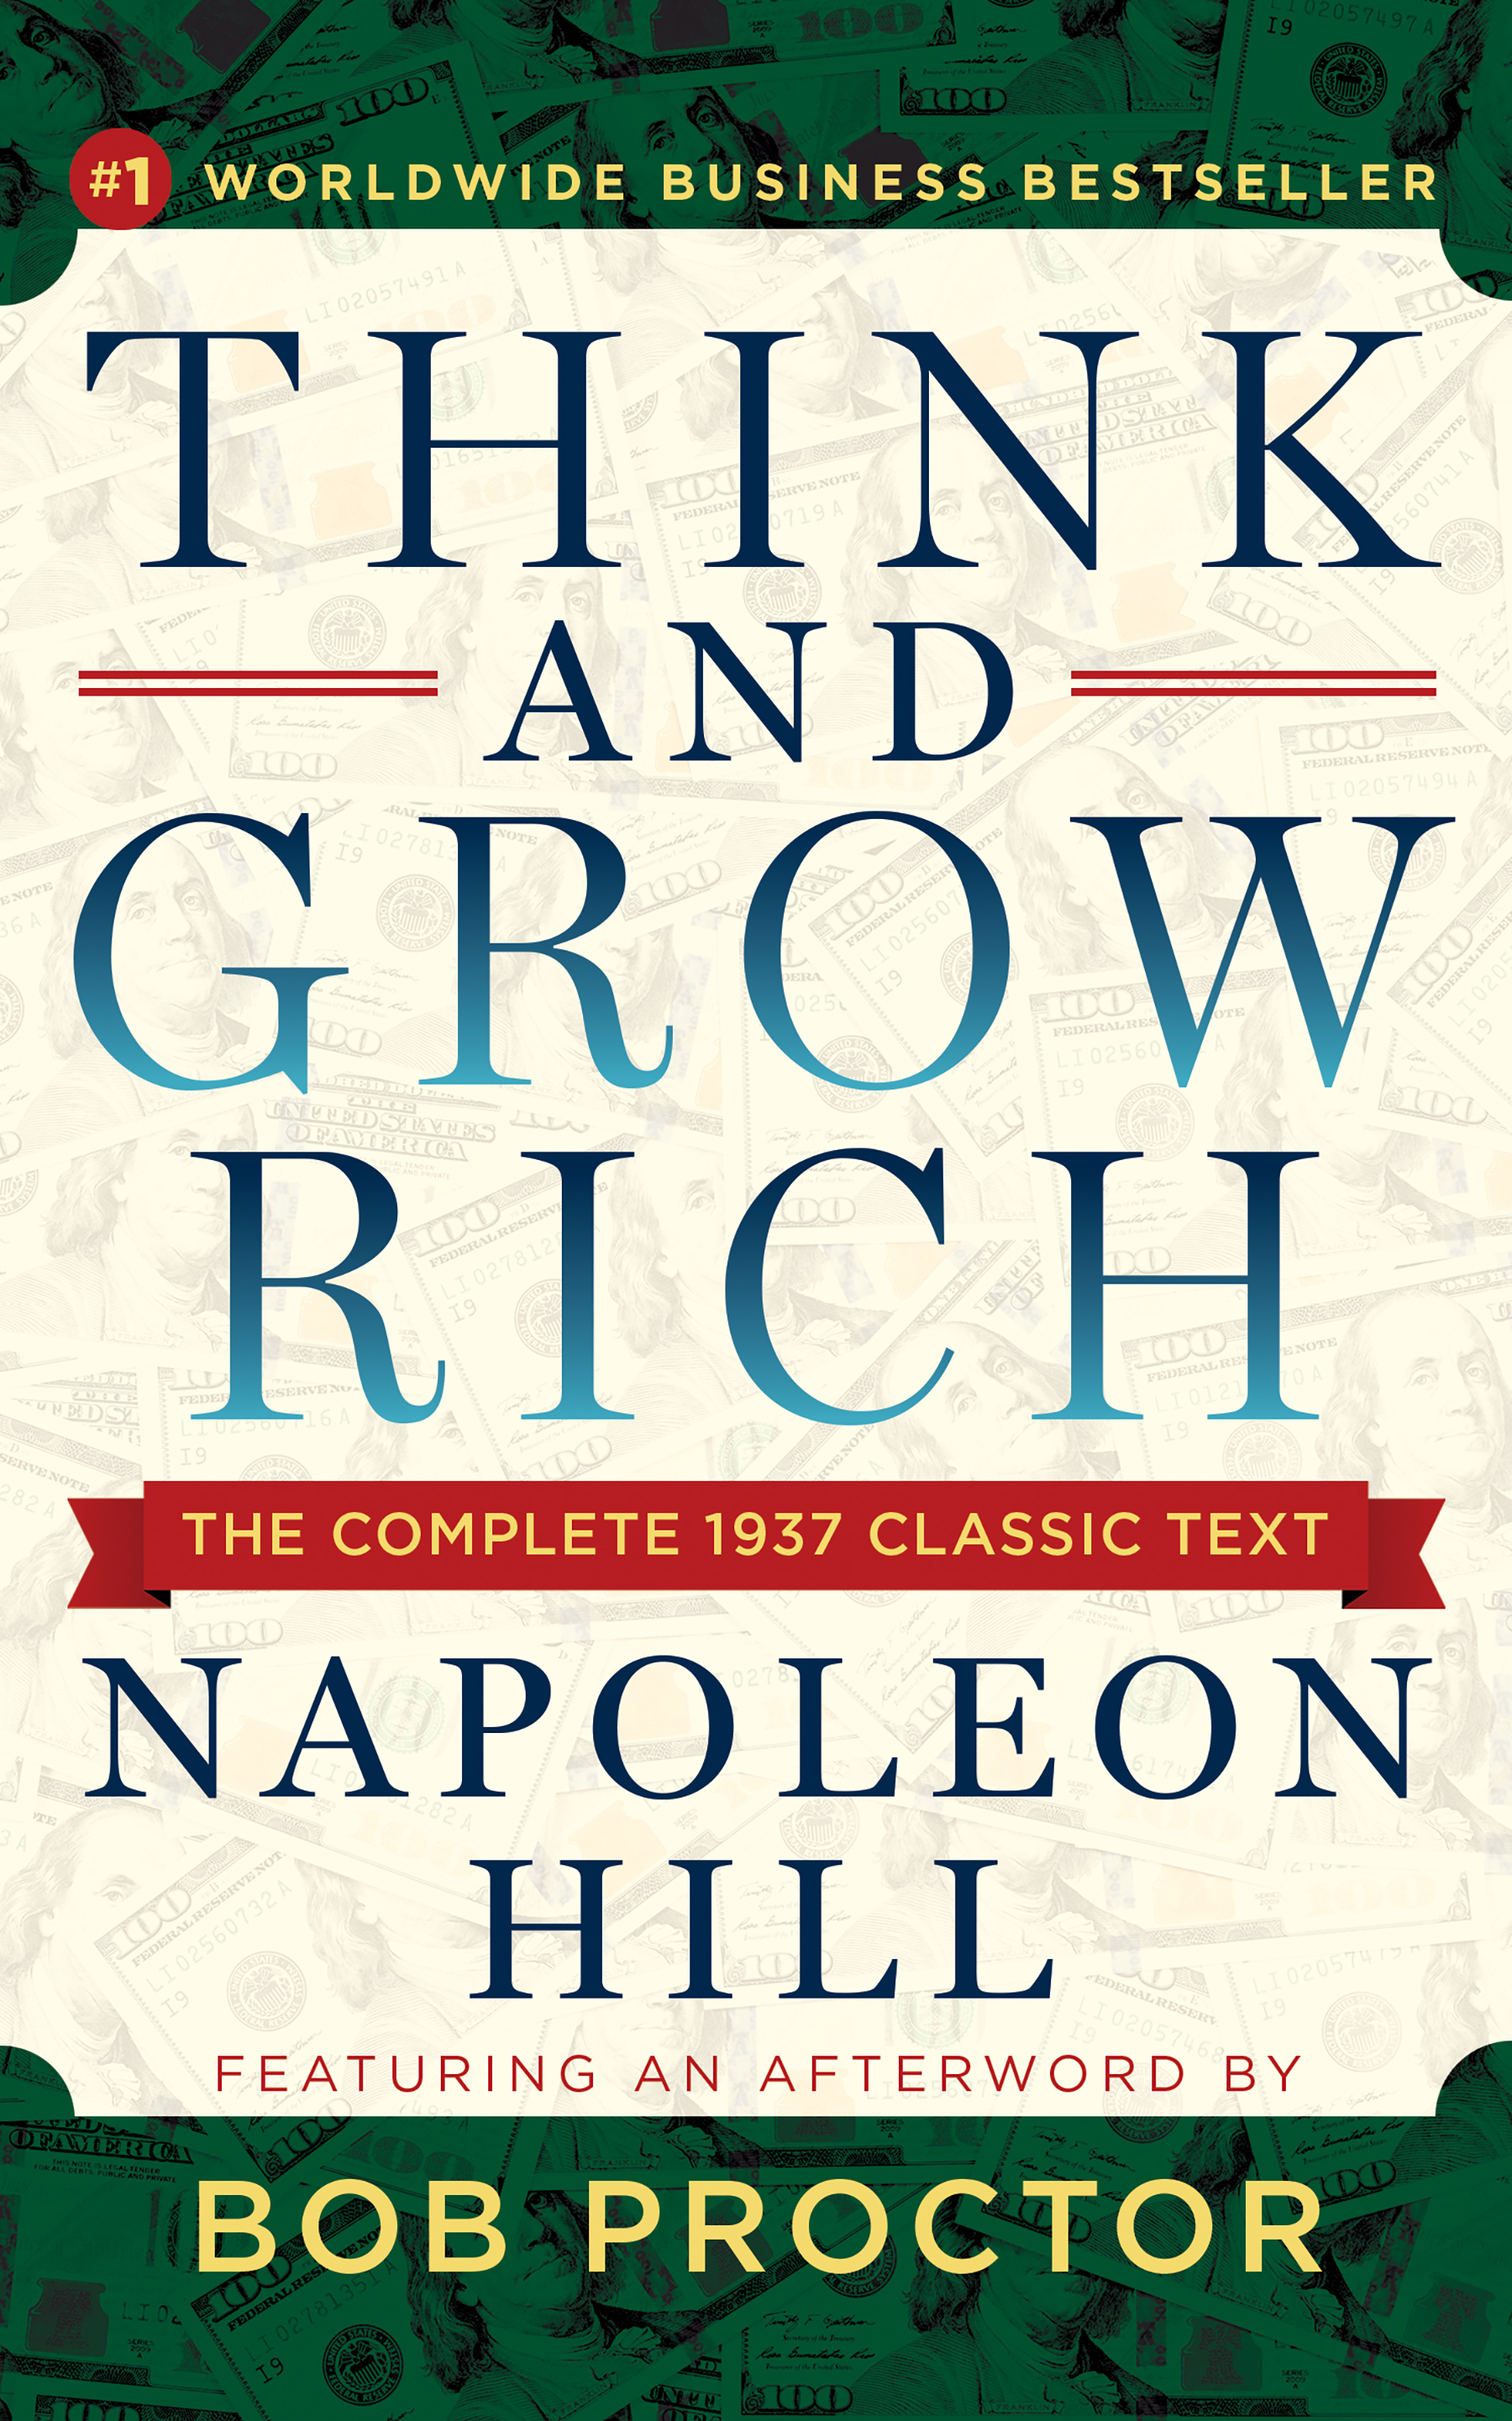 Think and Grow Rich by Napoleon Hill (ebook)